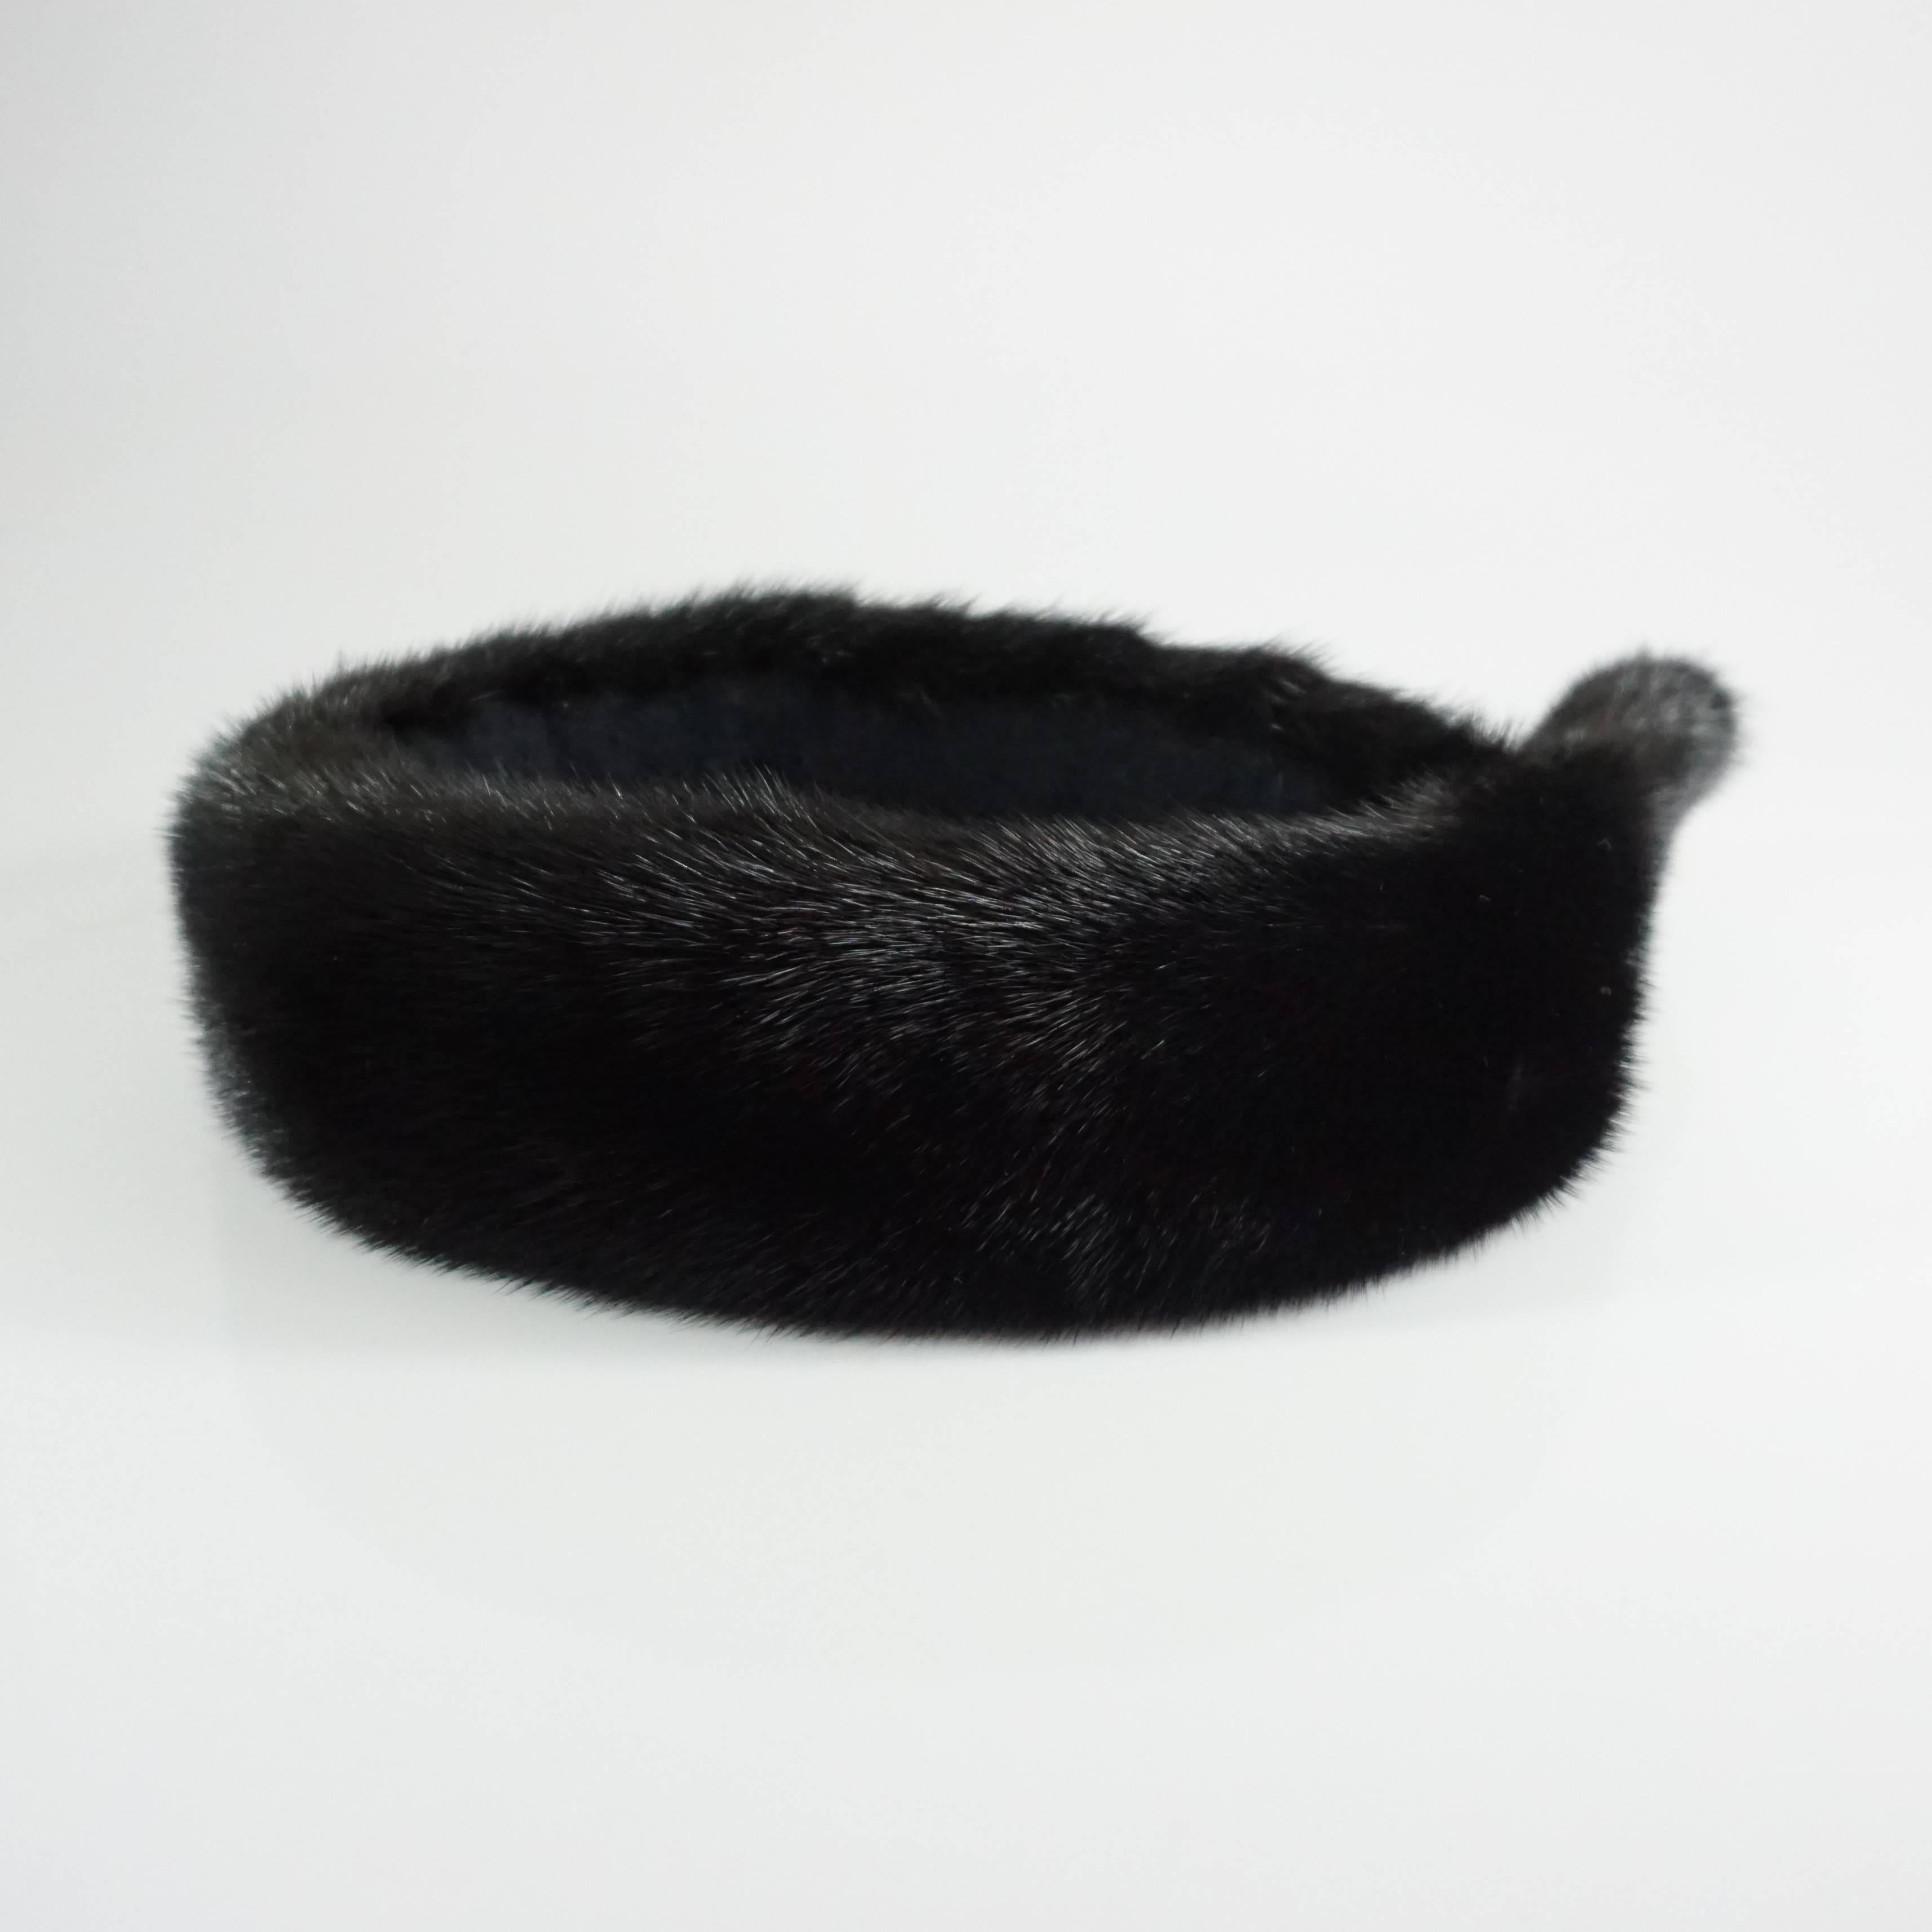 This Birger Christensen dark brown mink head piece has such a rich color, it almost pasts for black. The piece sits on top of the head and has a rhinestone pendant. The piece is in excellent condition with minimal wear to the fur.